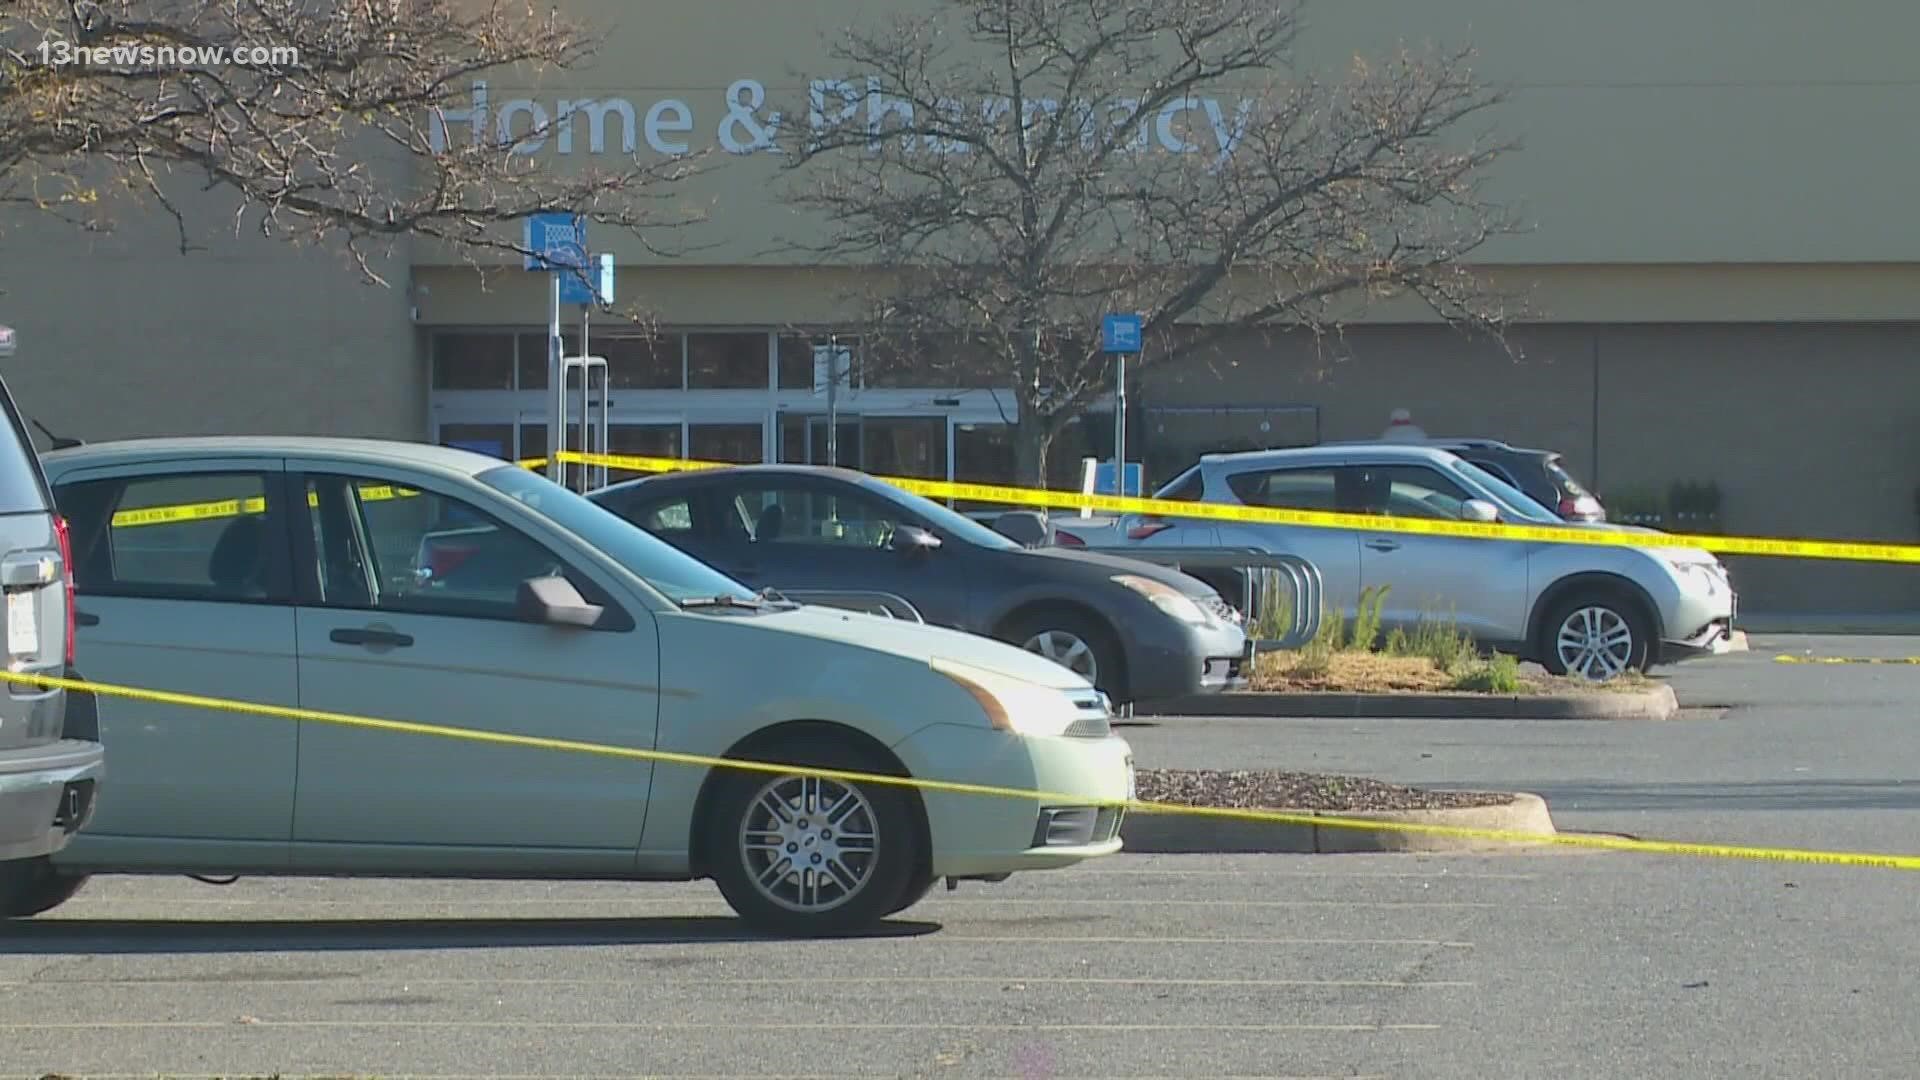 We're digging deeper into a second $50 million lawsuit Walmart is facing after the shooting.